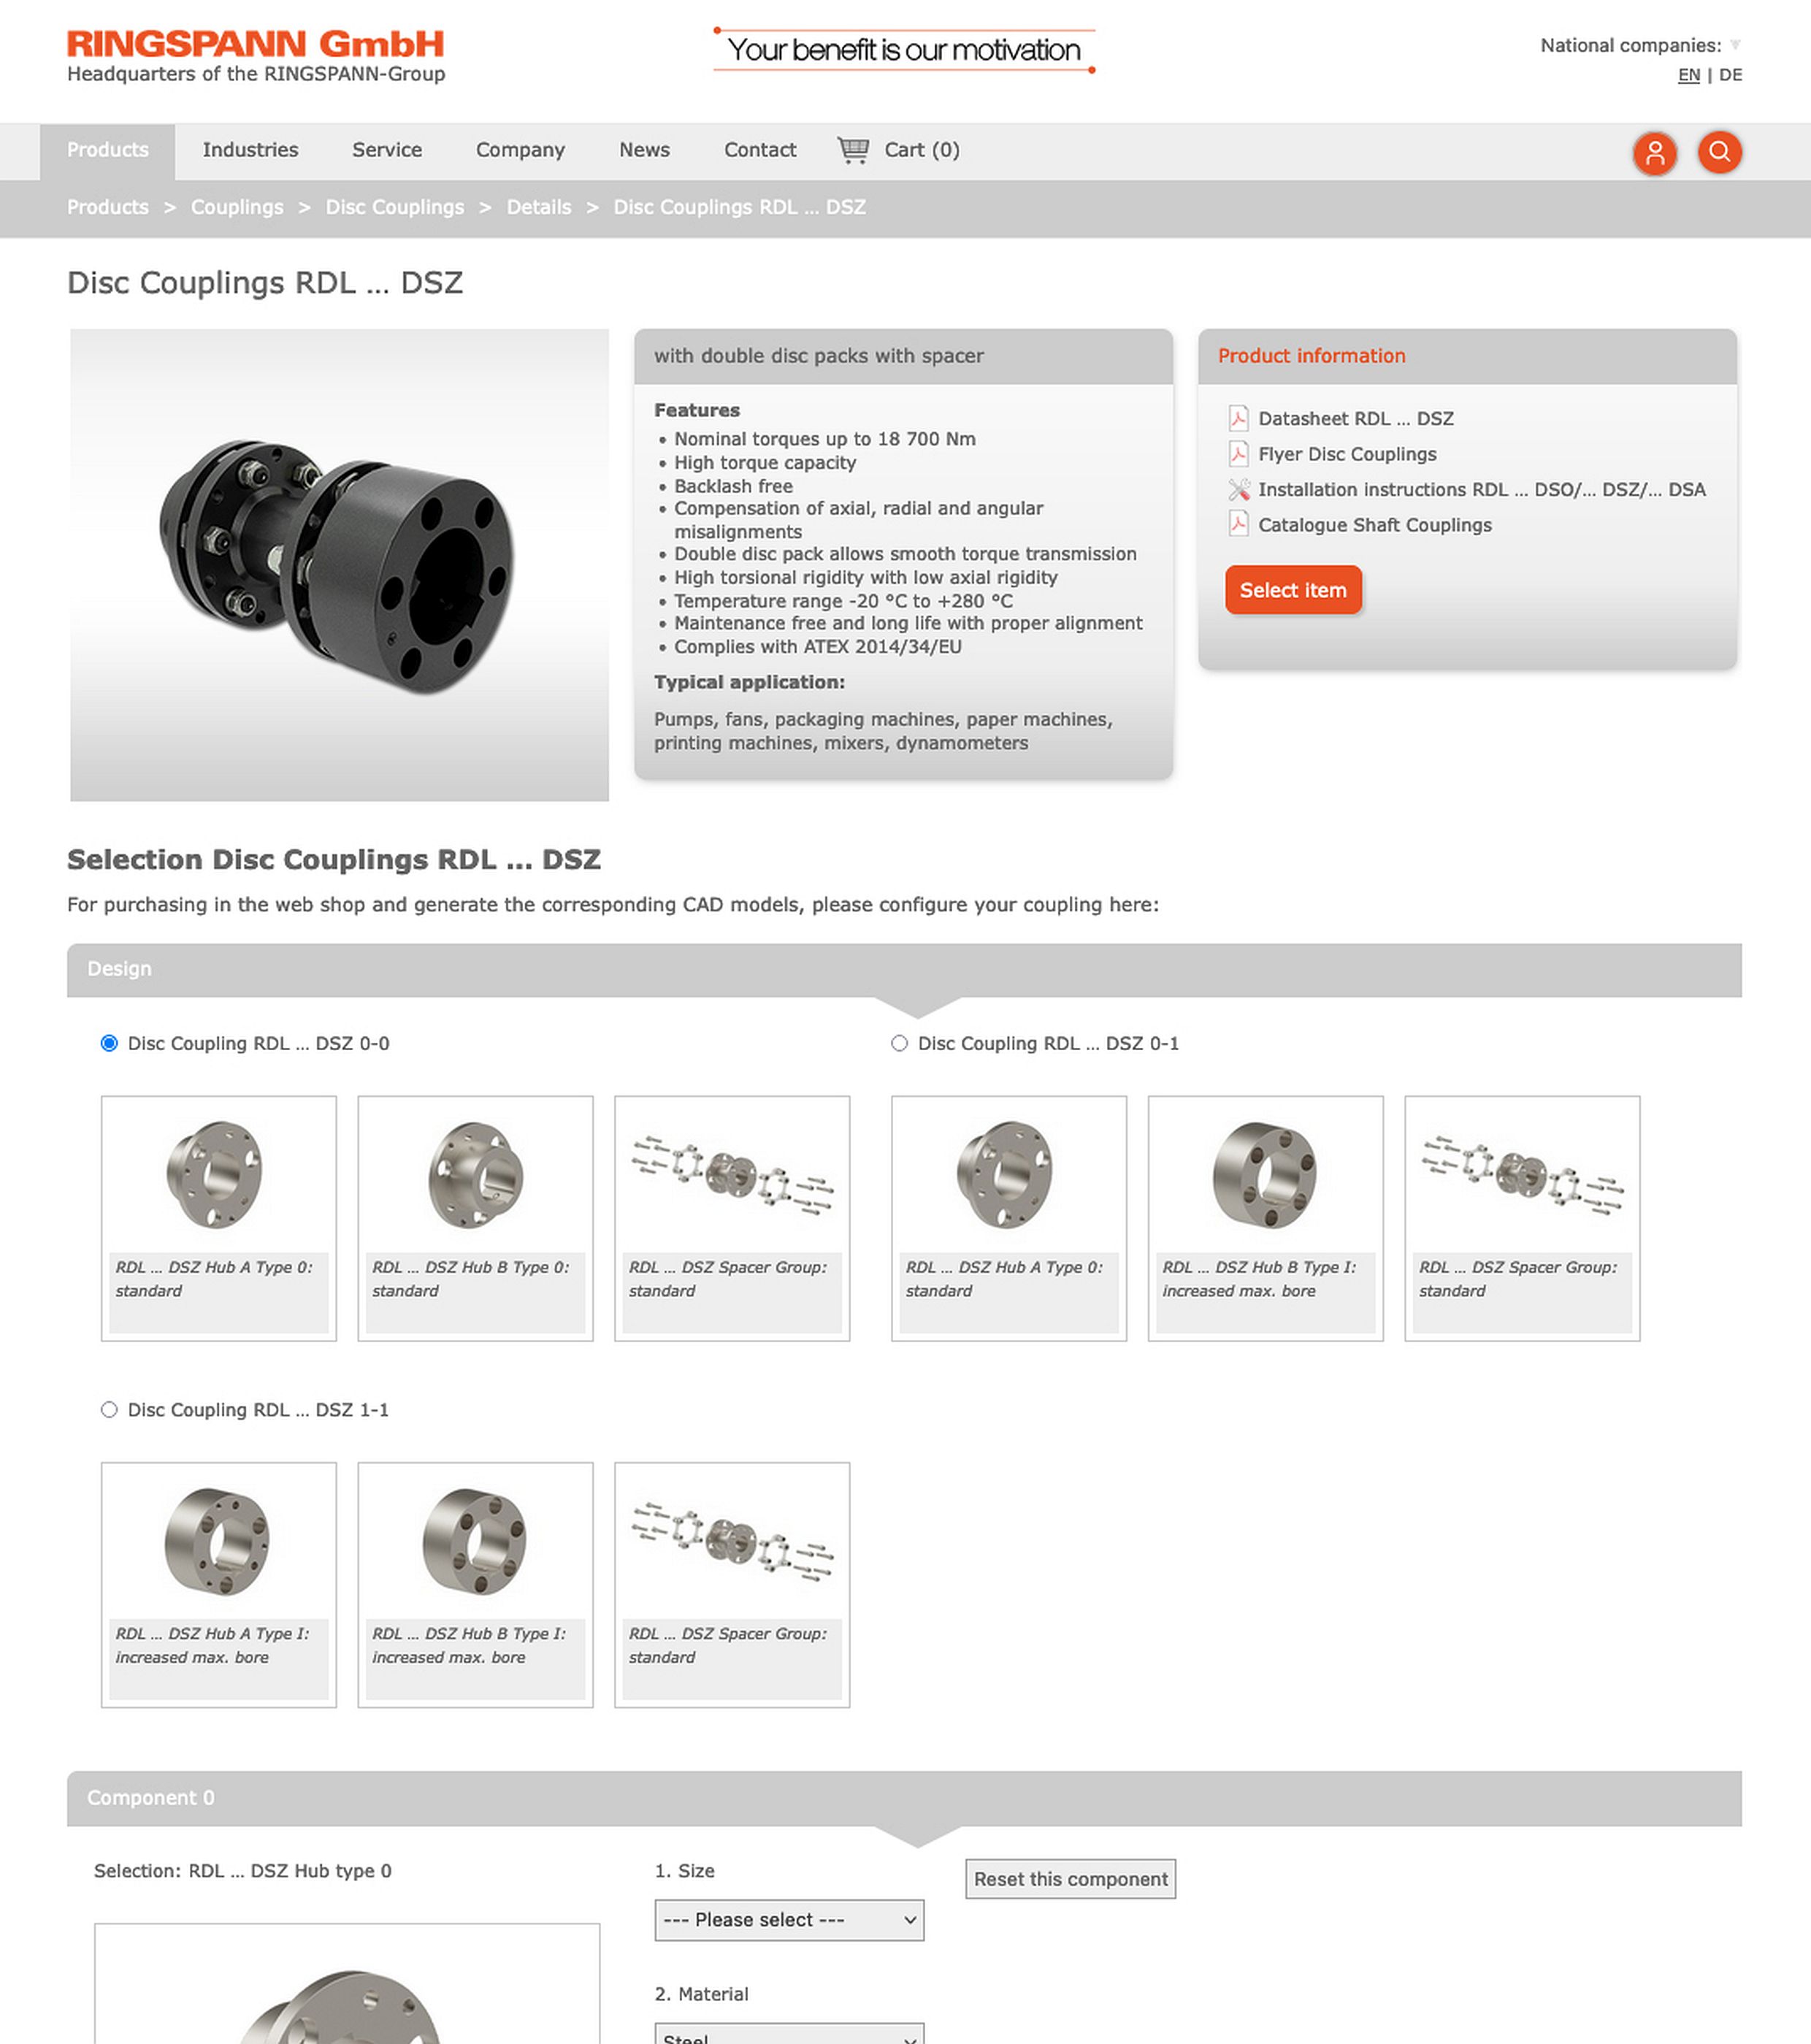 modular system from RINGSPANN in its webshop